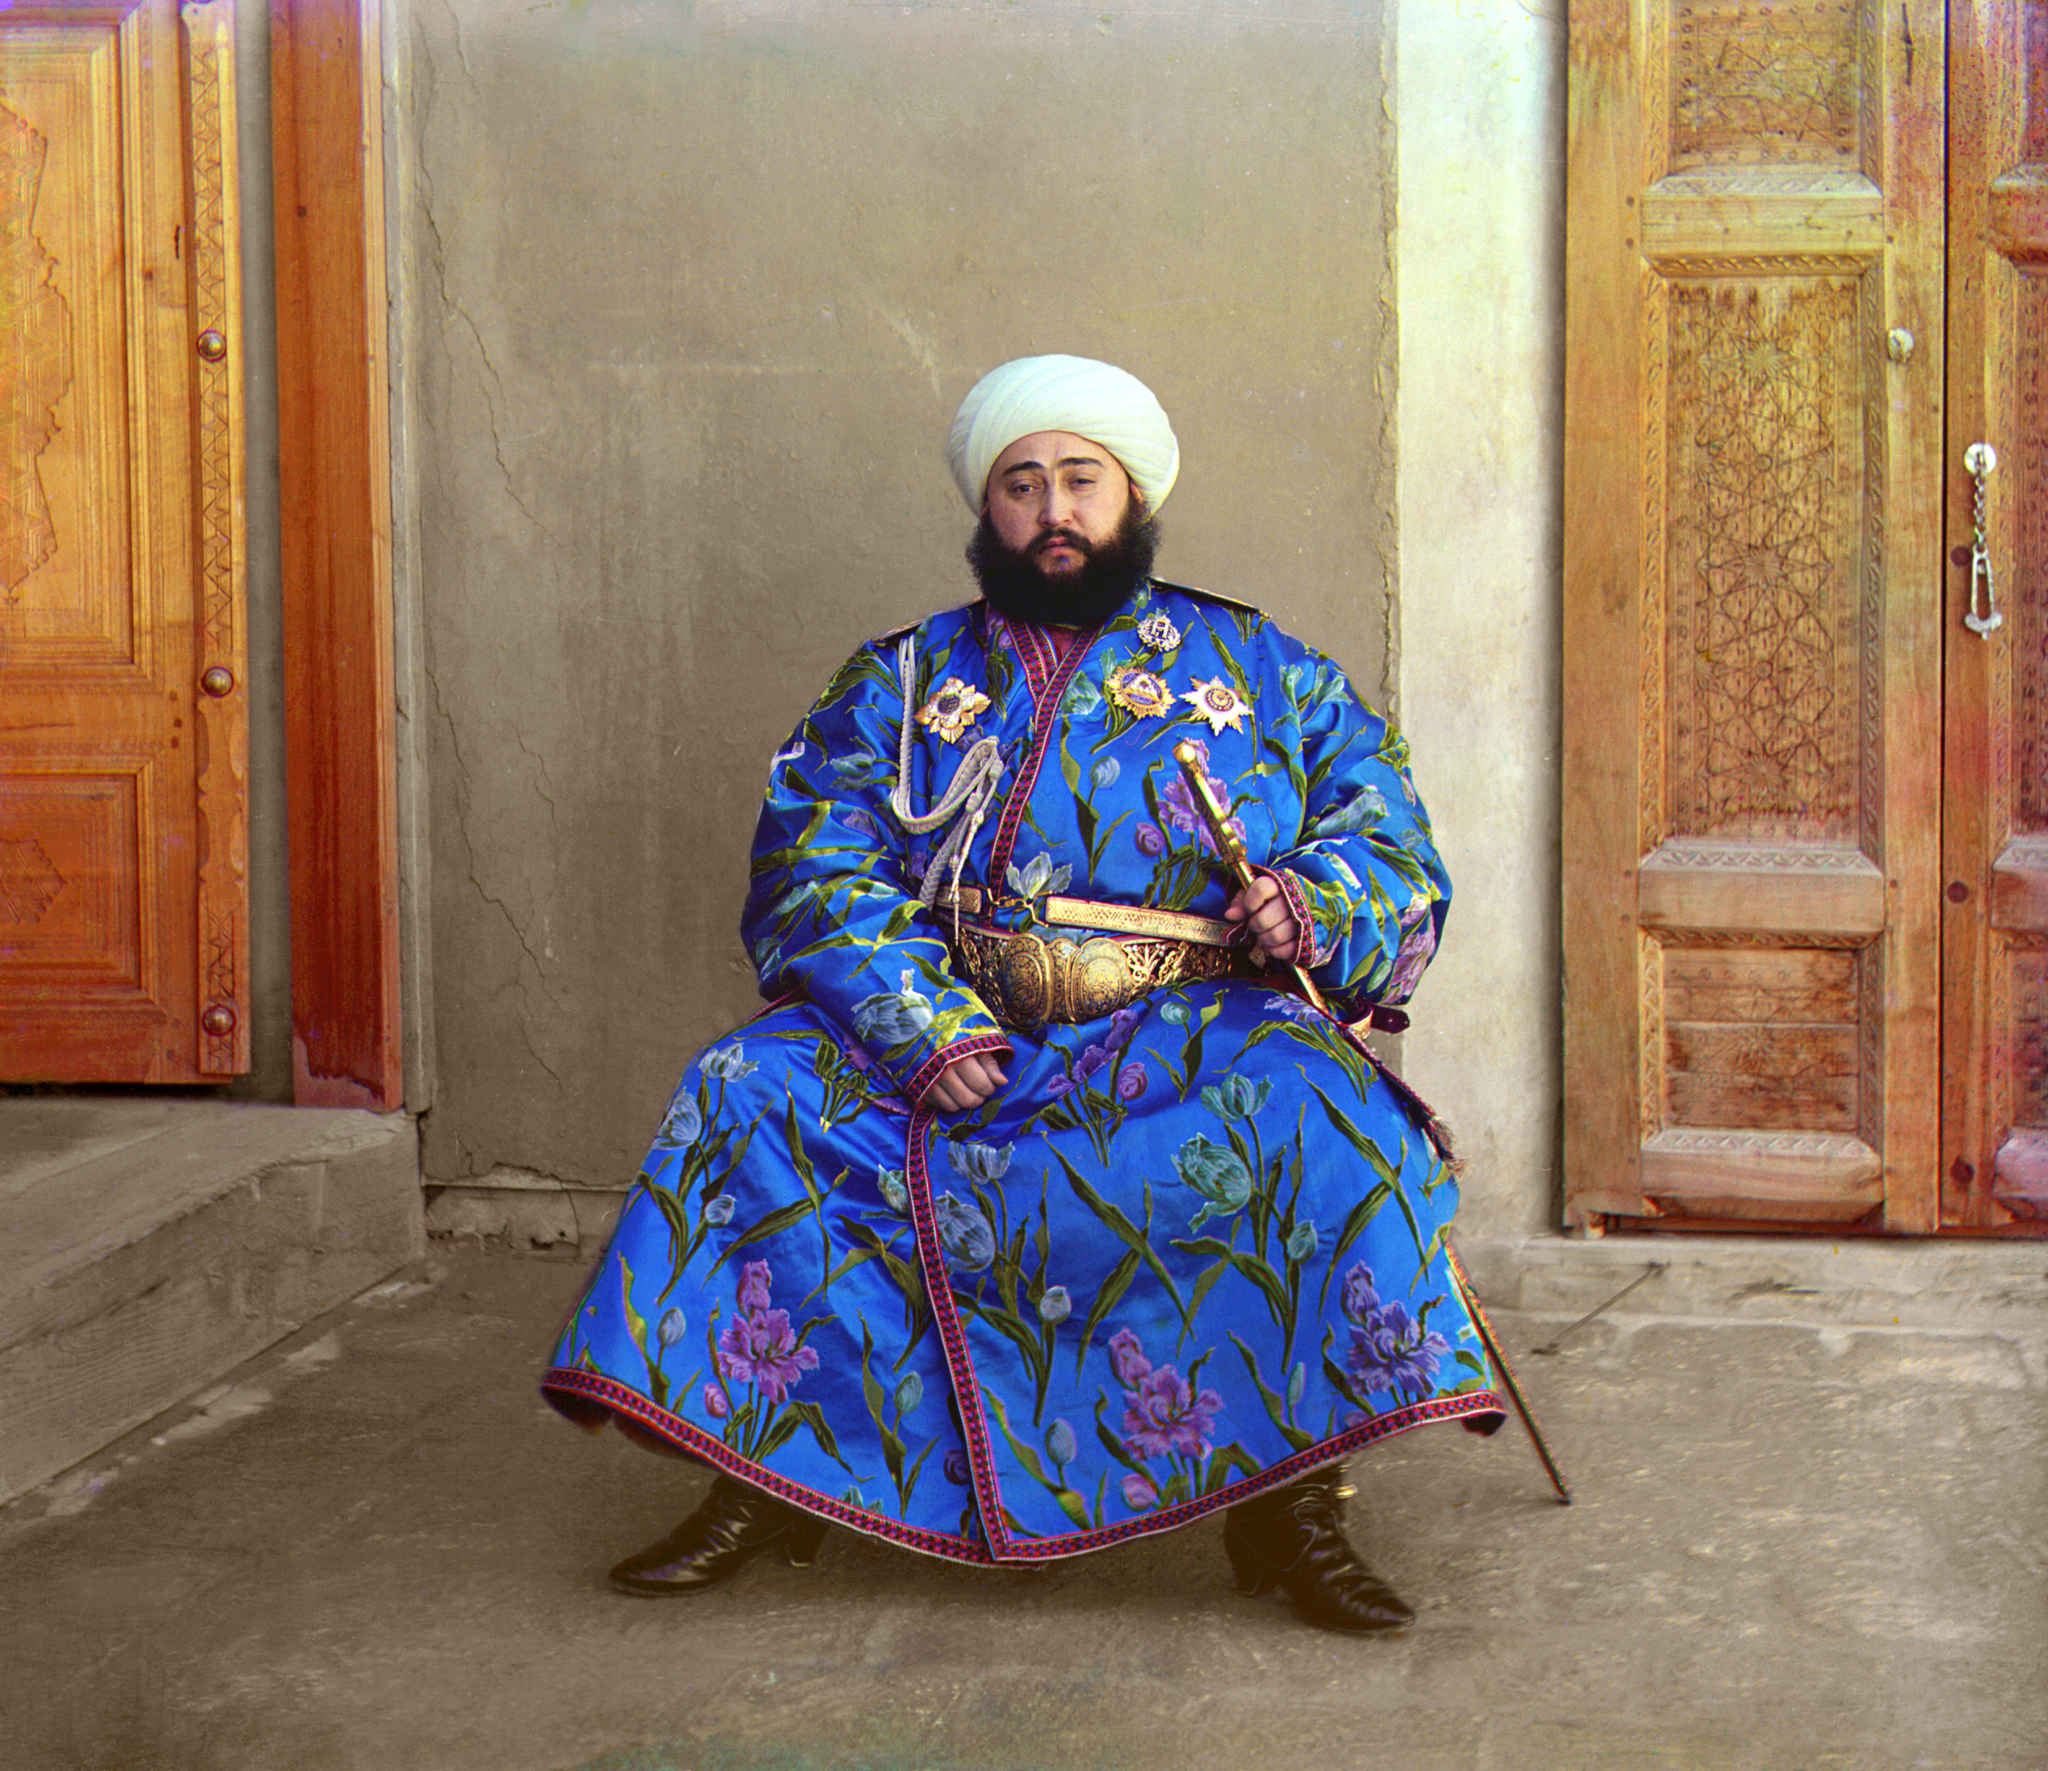 Photographs by the Russian pioneer in color photography, Sergey Prokudin-Gorsky